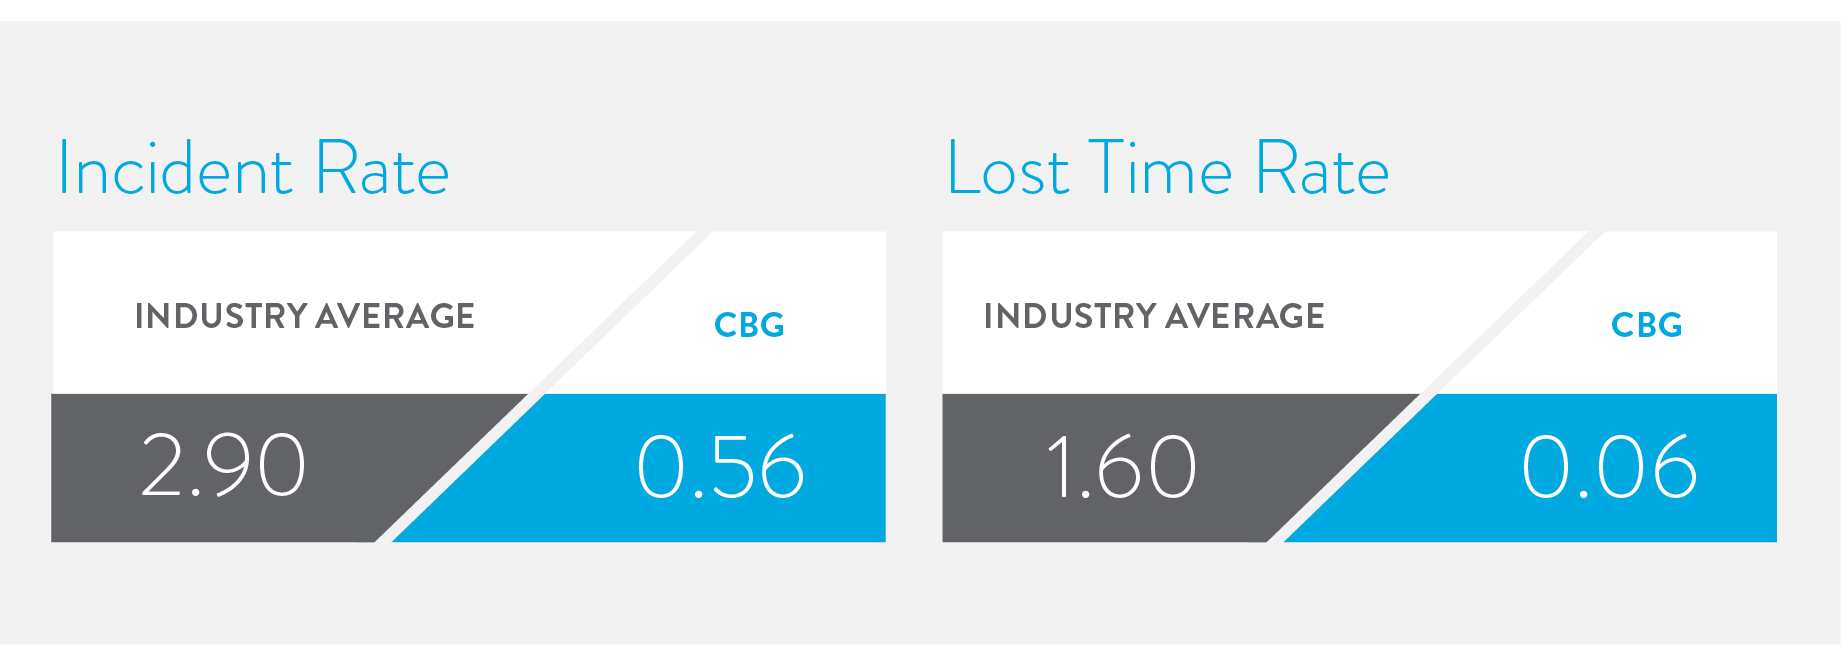 CBG's Incident and Lost Time Rates are far below industry averages.